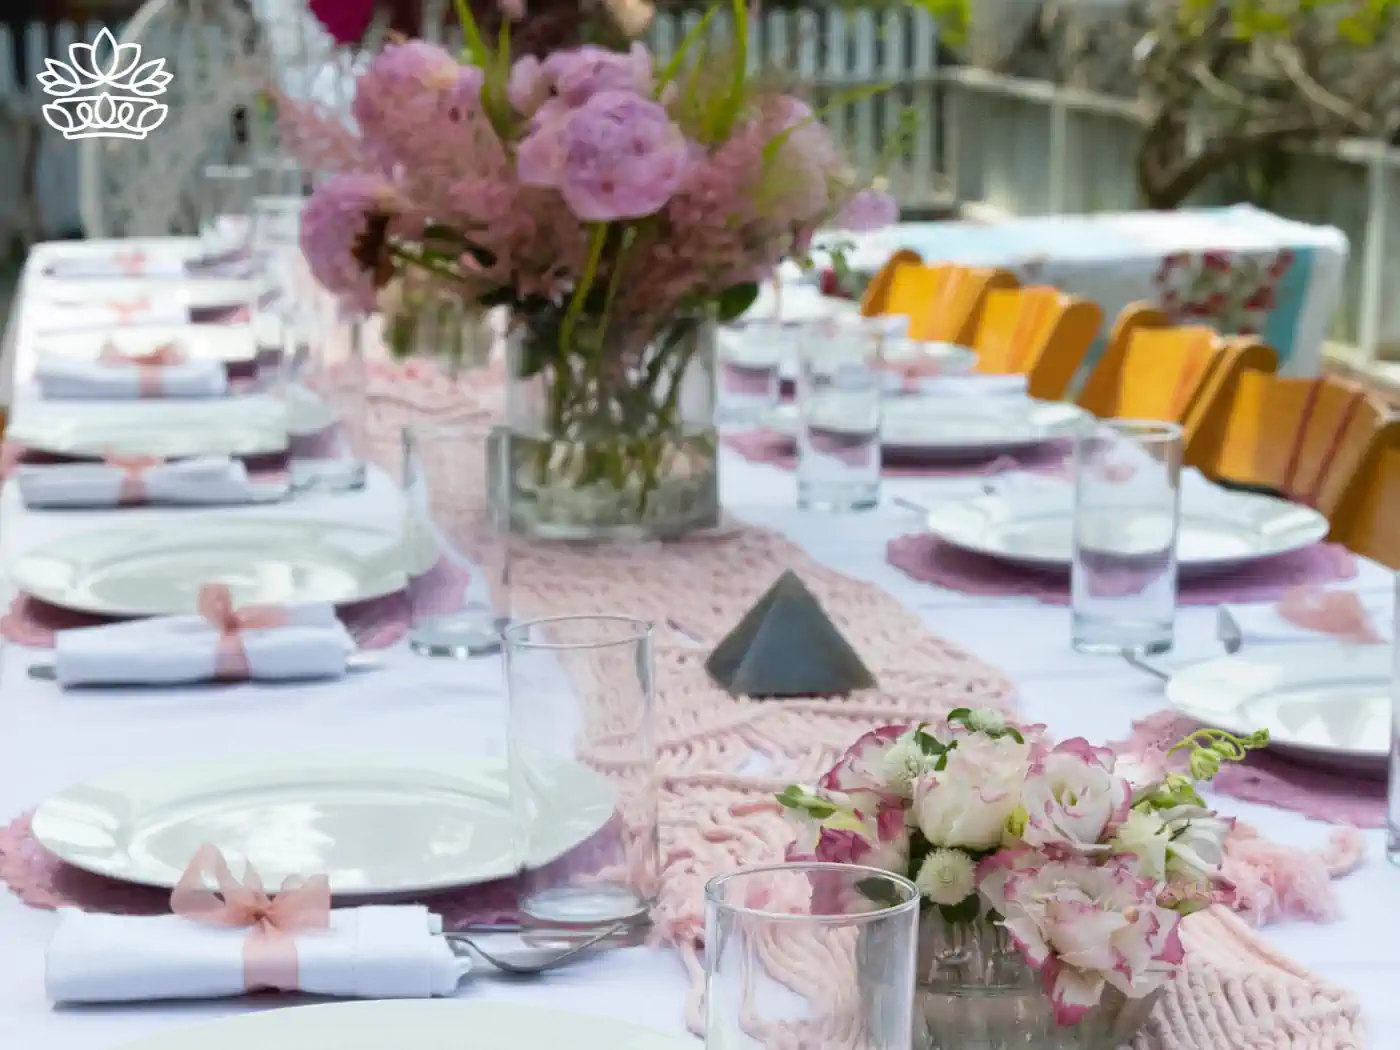 Elegant table setting for a baby shower with pink floral centrepieces and neatly arranged place settings, creating a charming atmosphere. Fabulous Flowers and Gifts: Baby Shower Flowers Collection